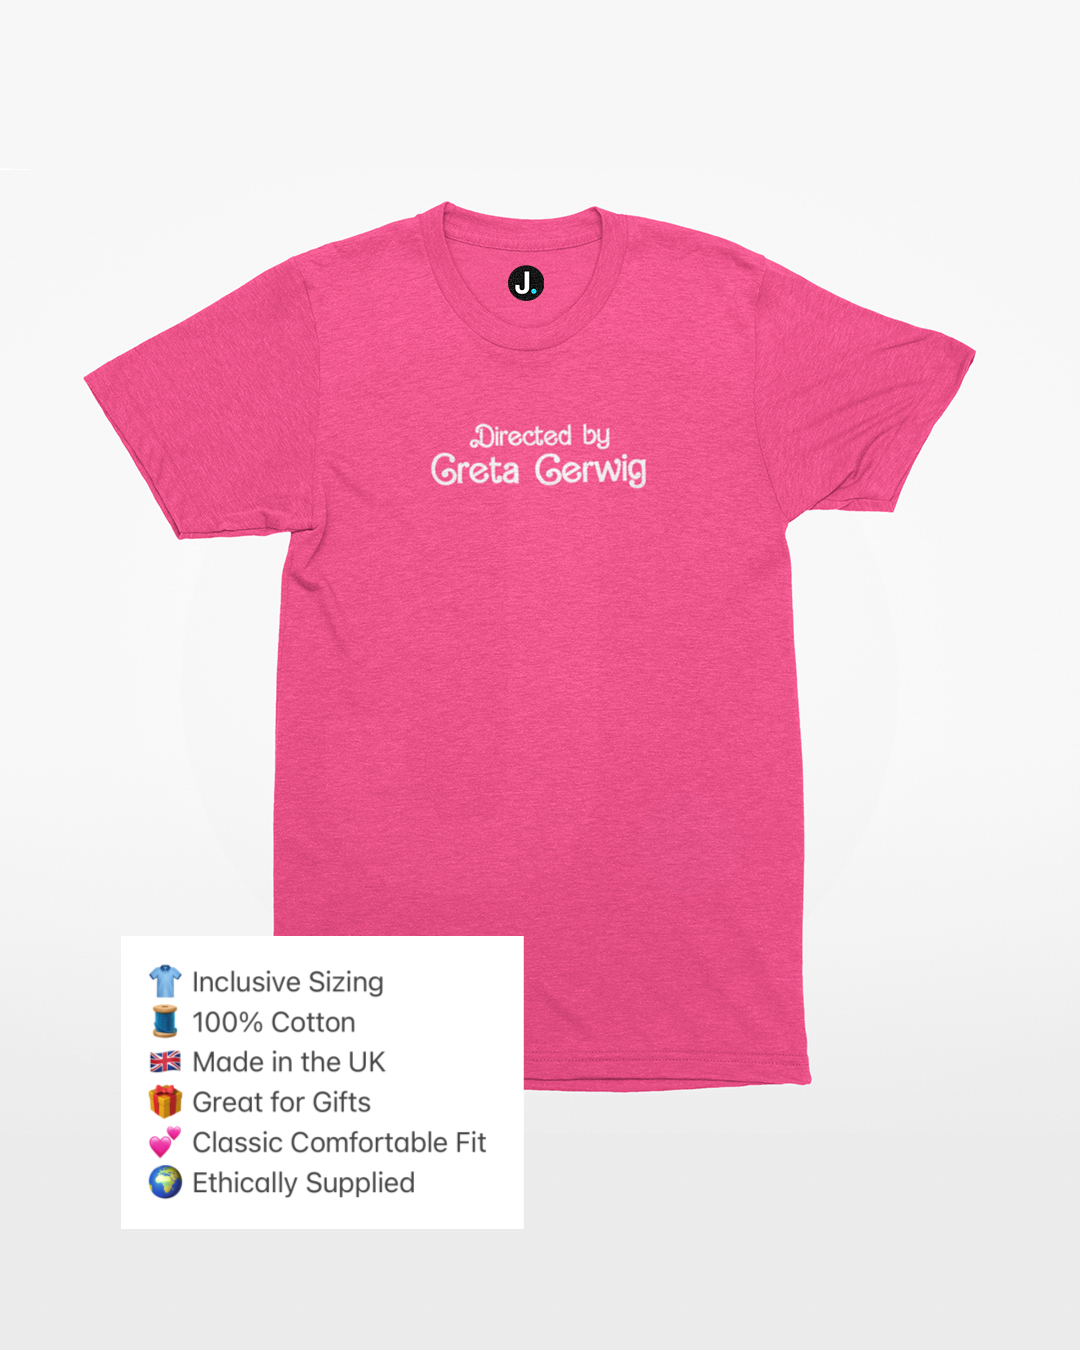 Directed By Greta Gerwig T-Shirt - Directed By Greta Gerwig T-Shirt - Barbie Director Greta Gerwig Inspired T-Shirt